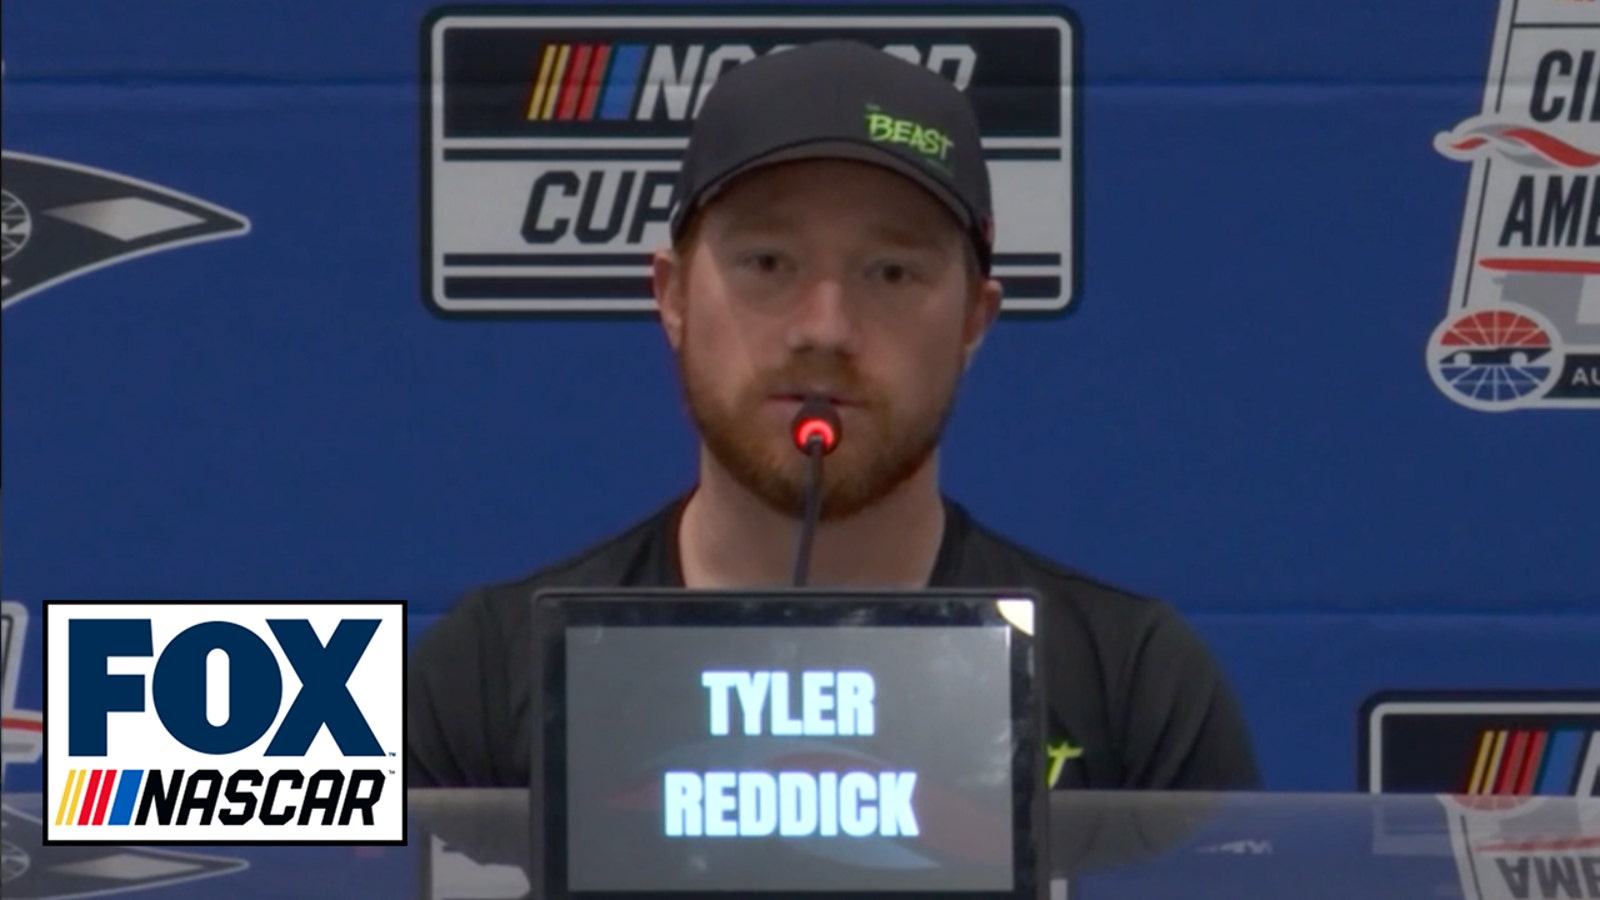 Tyler Reddick says Ty Gibbs has speed and his first Cup win could come soon